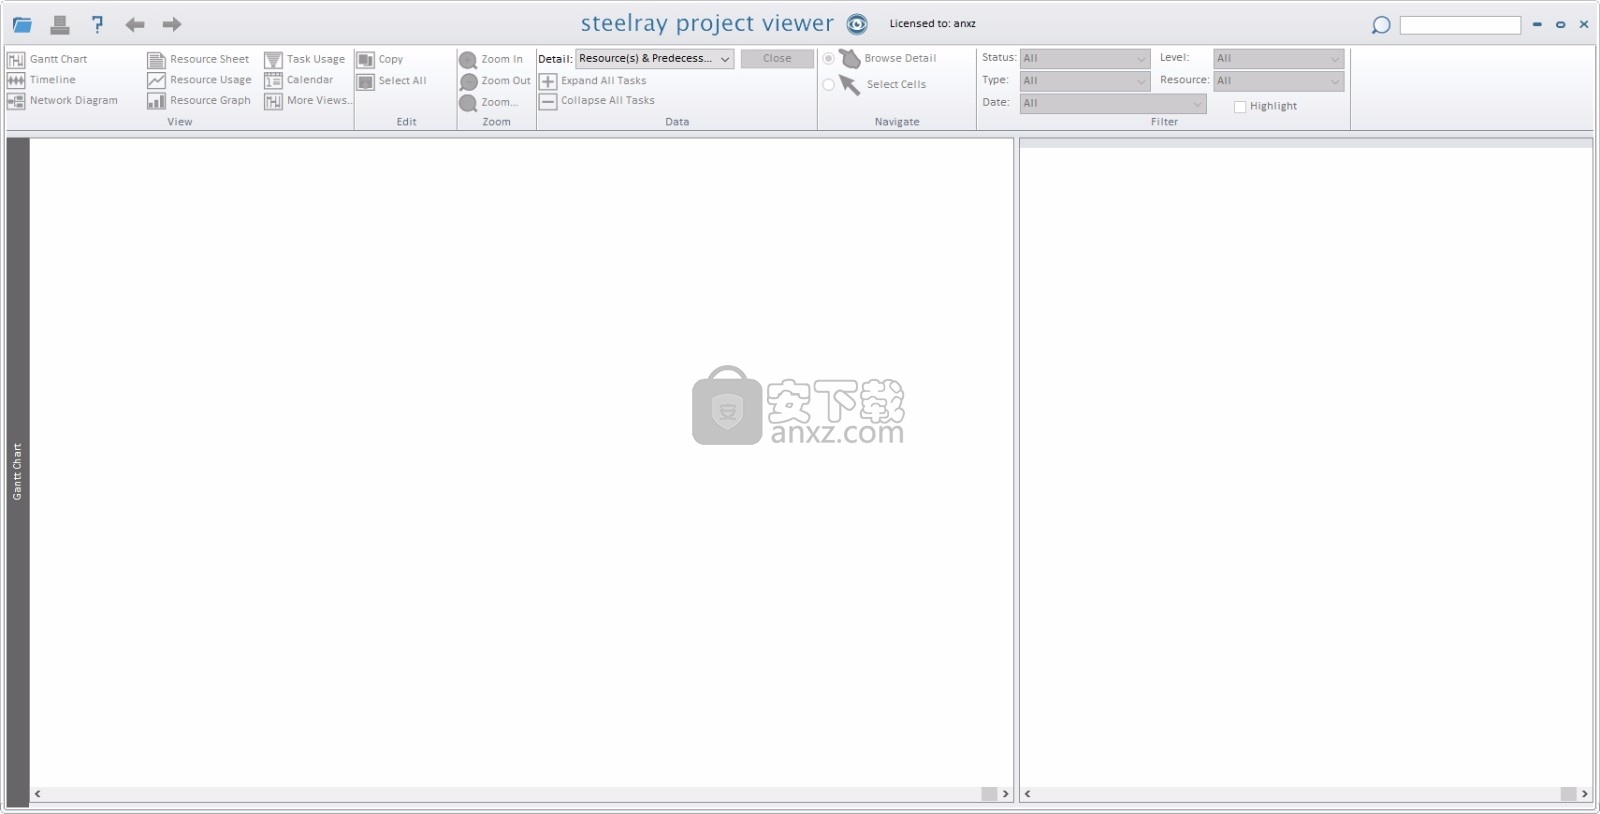 download the last version for android Steelray Project Viewer 6.18